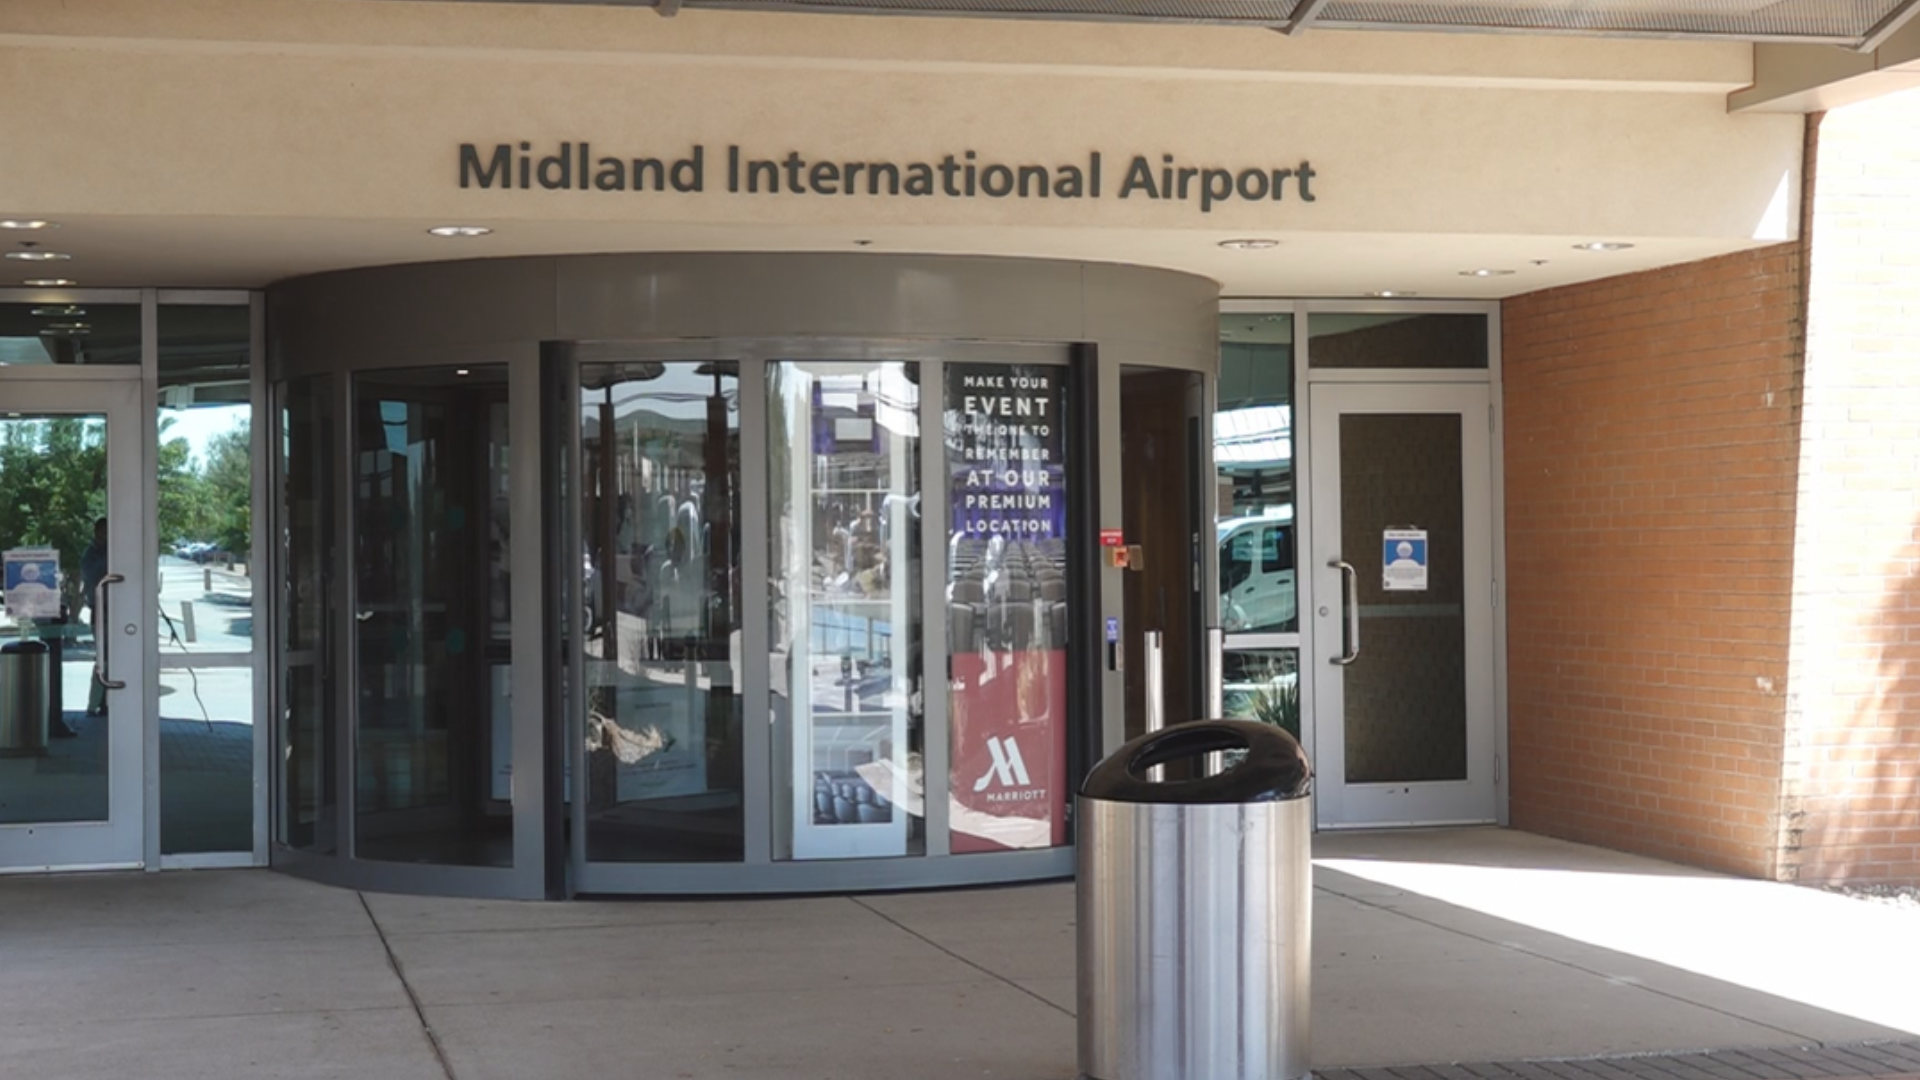 Travelers will now have the option to fly directly from Midland to Austin. This means no more stops in Dallas or Houston.